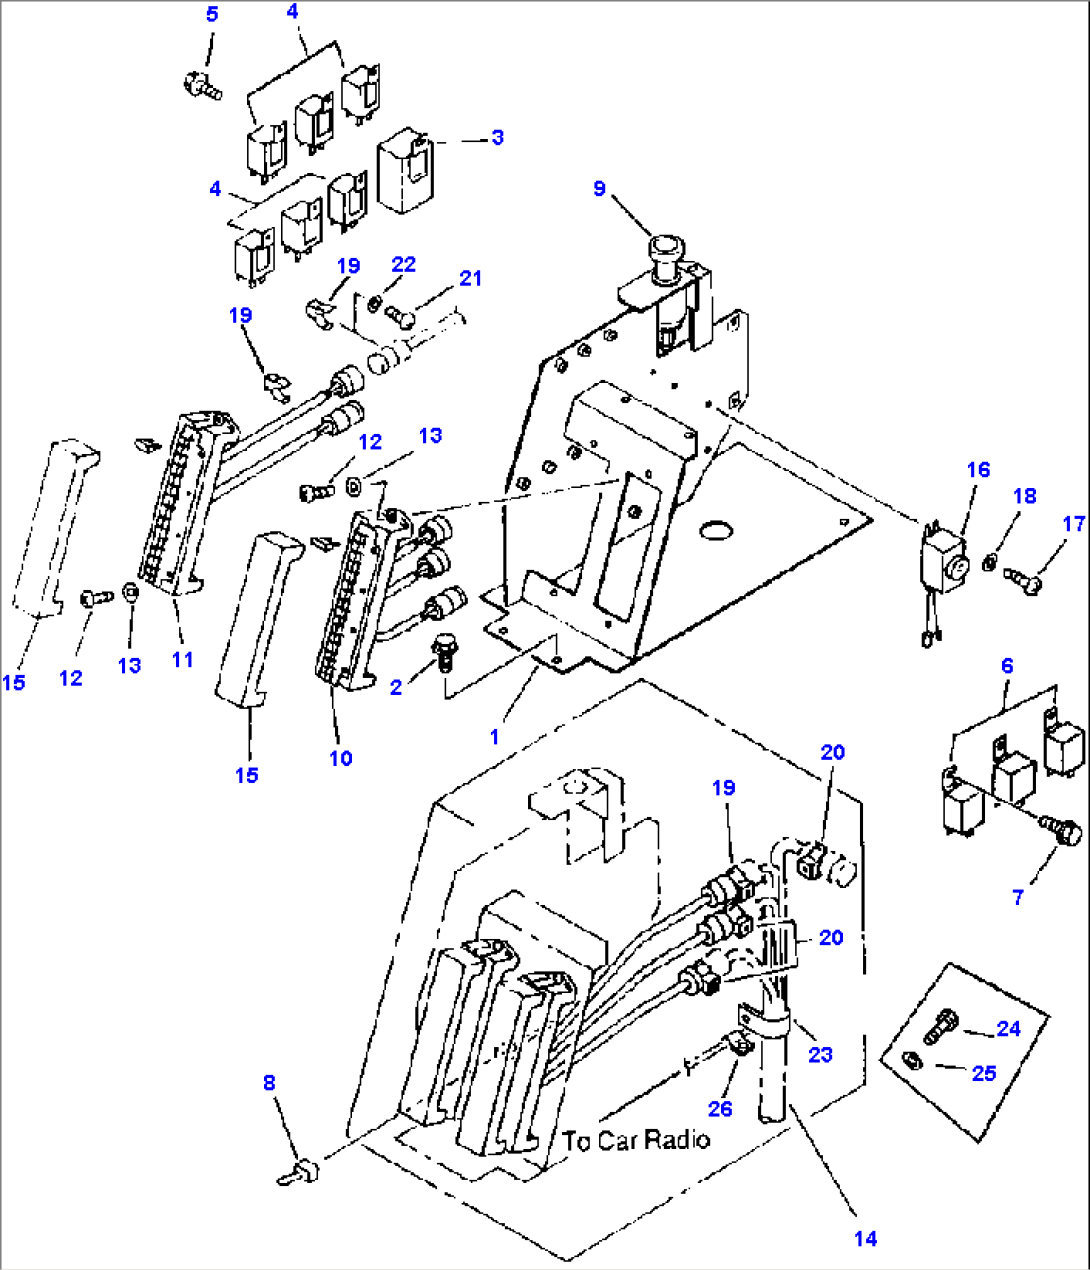 ELECTRICAL SYSTEM (RH CONSOLE)